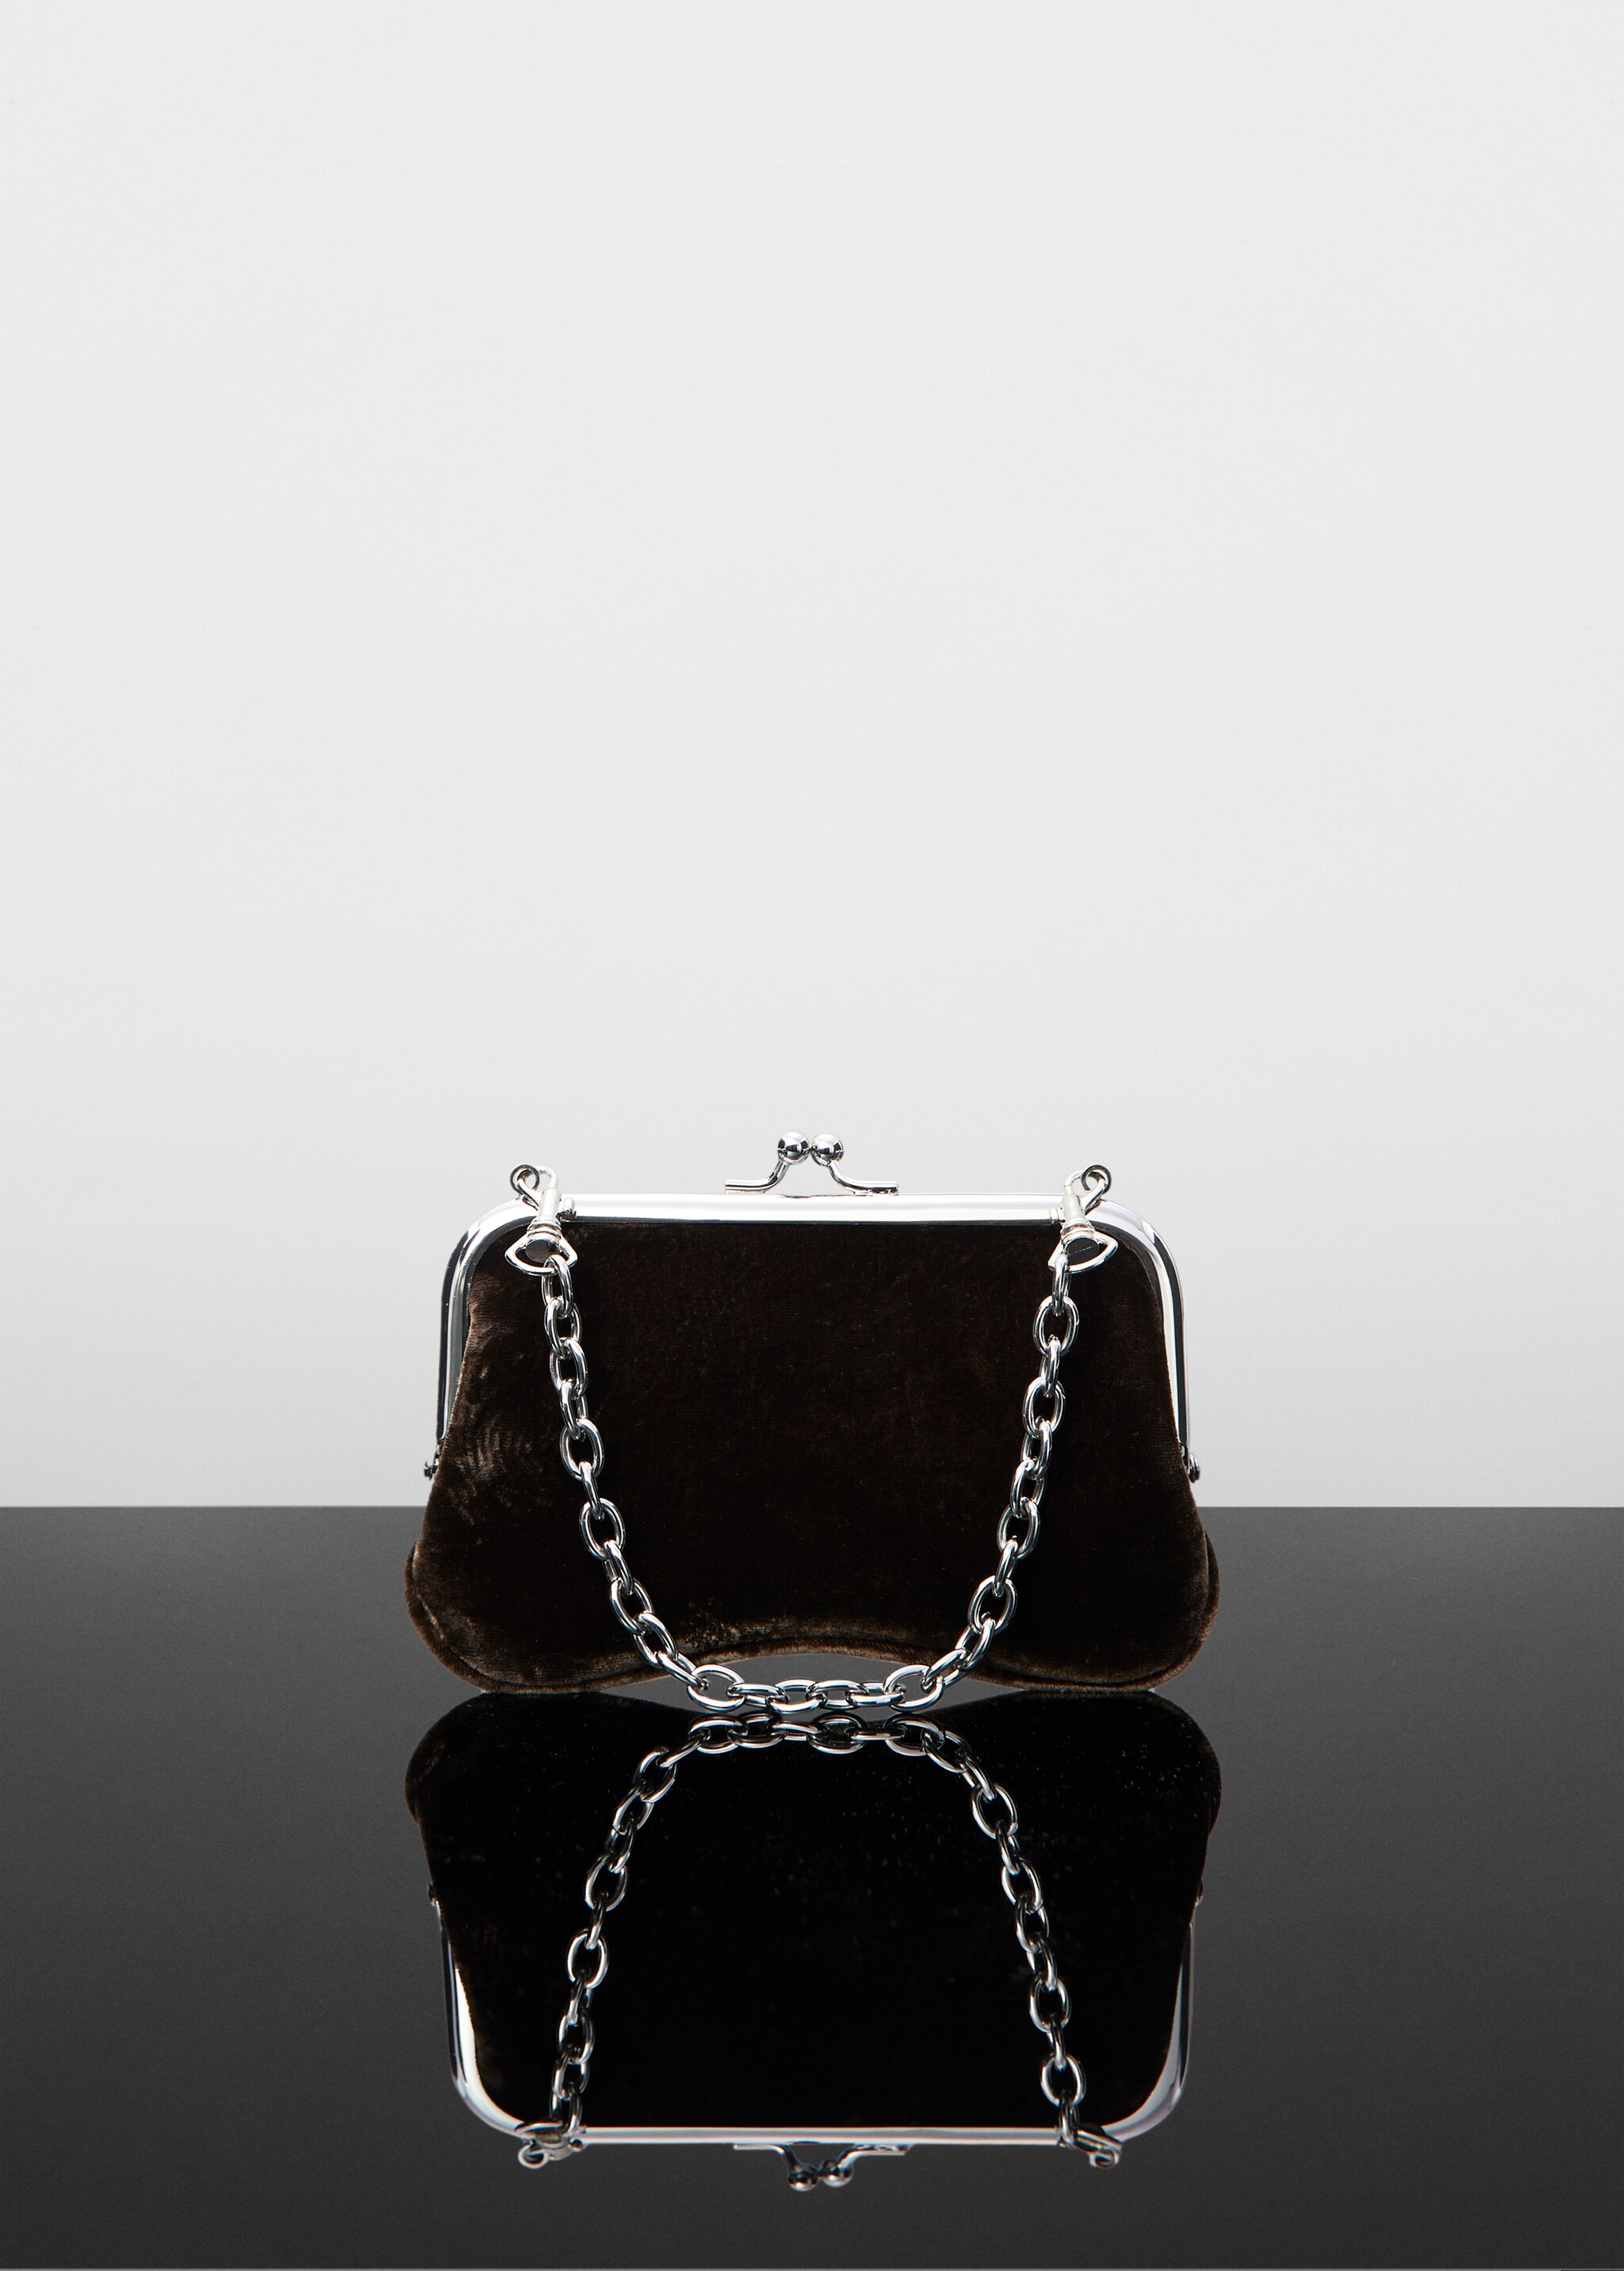 Chain velvet bag - Article without model